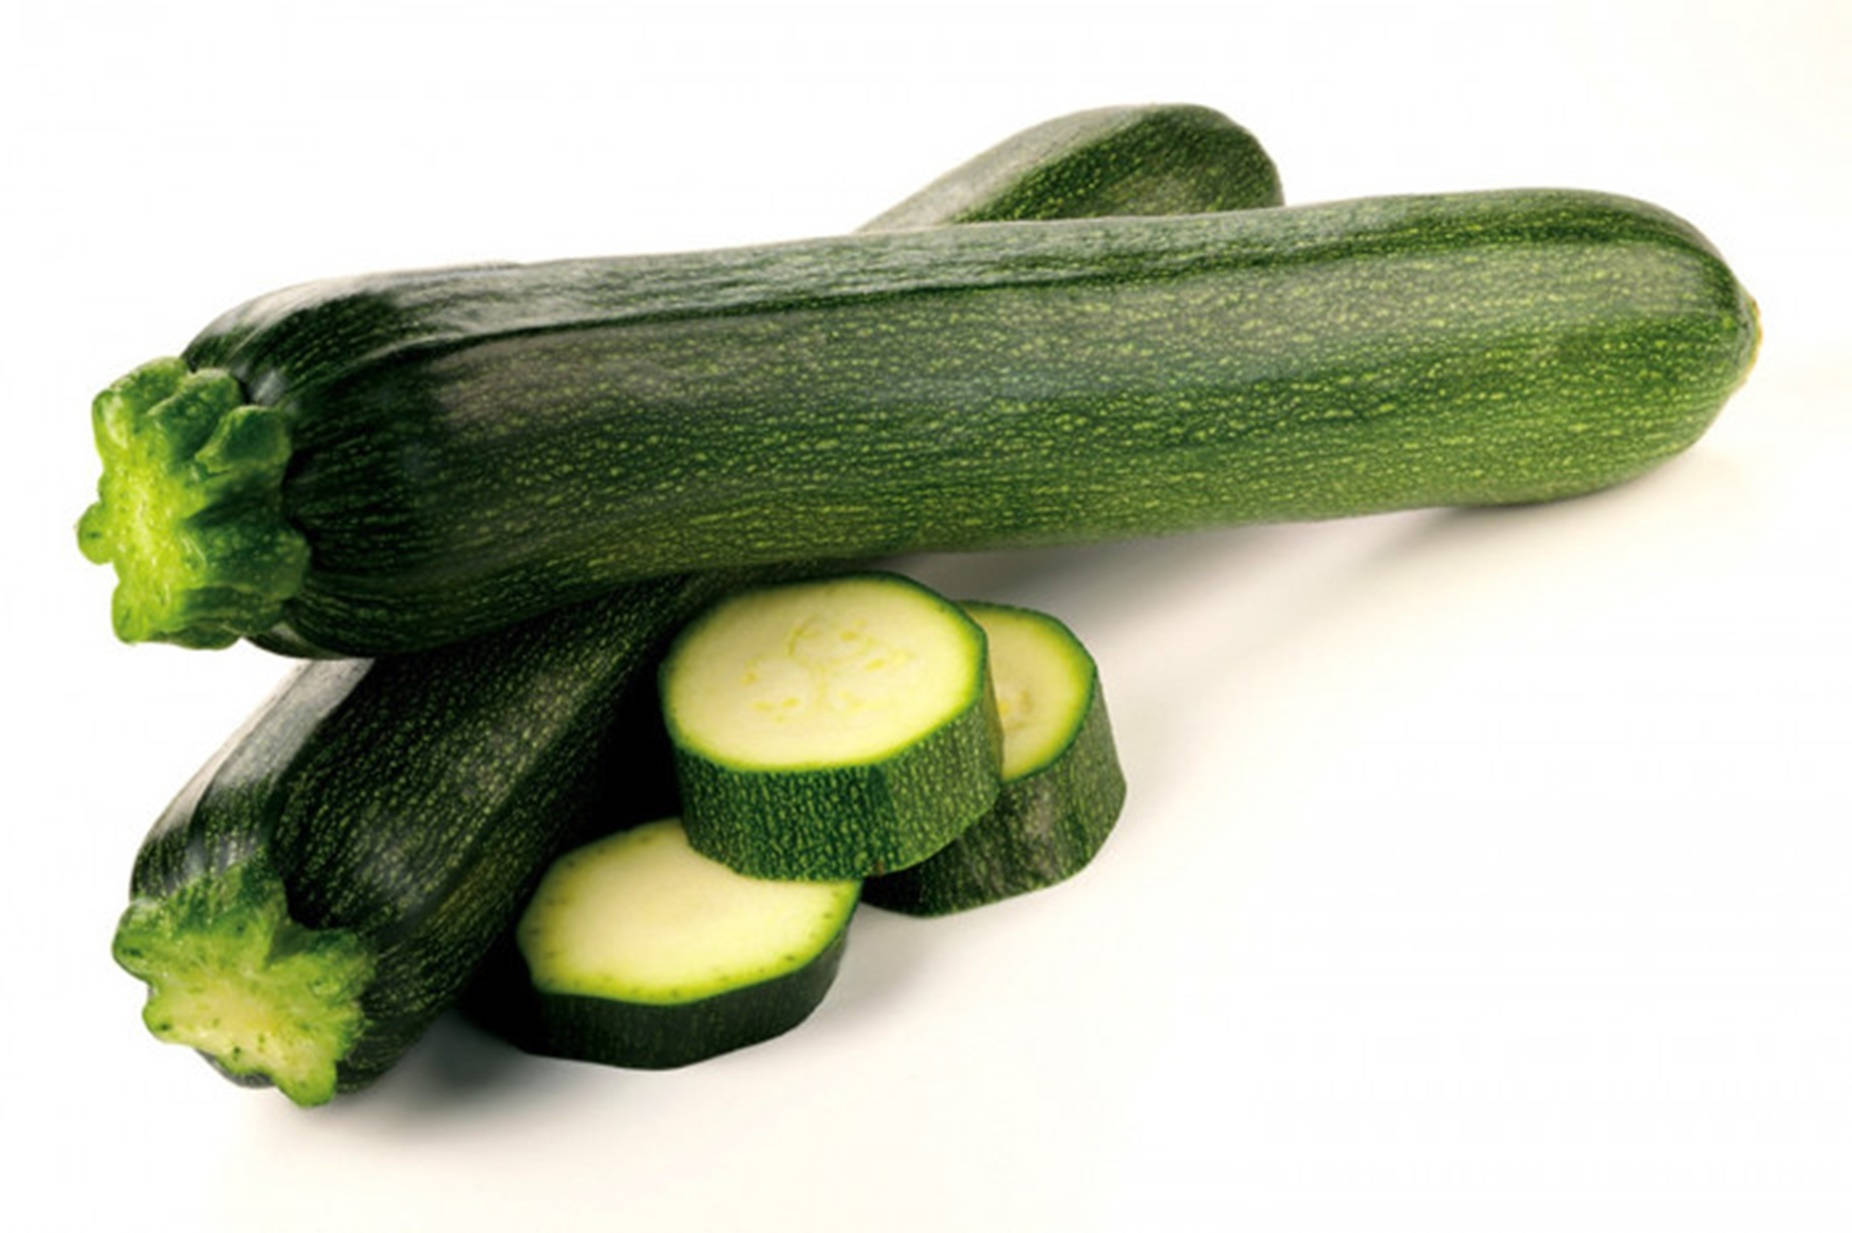 Caption: Fresh Zucchini with Sliced Pieces Close-Up Wallpaper